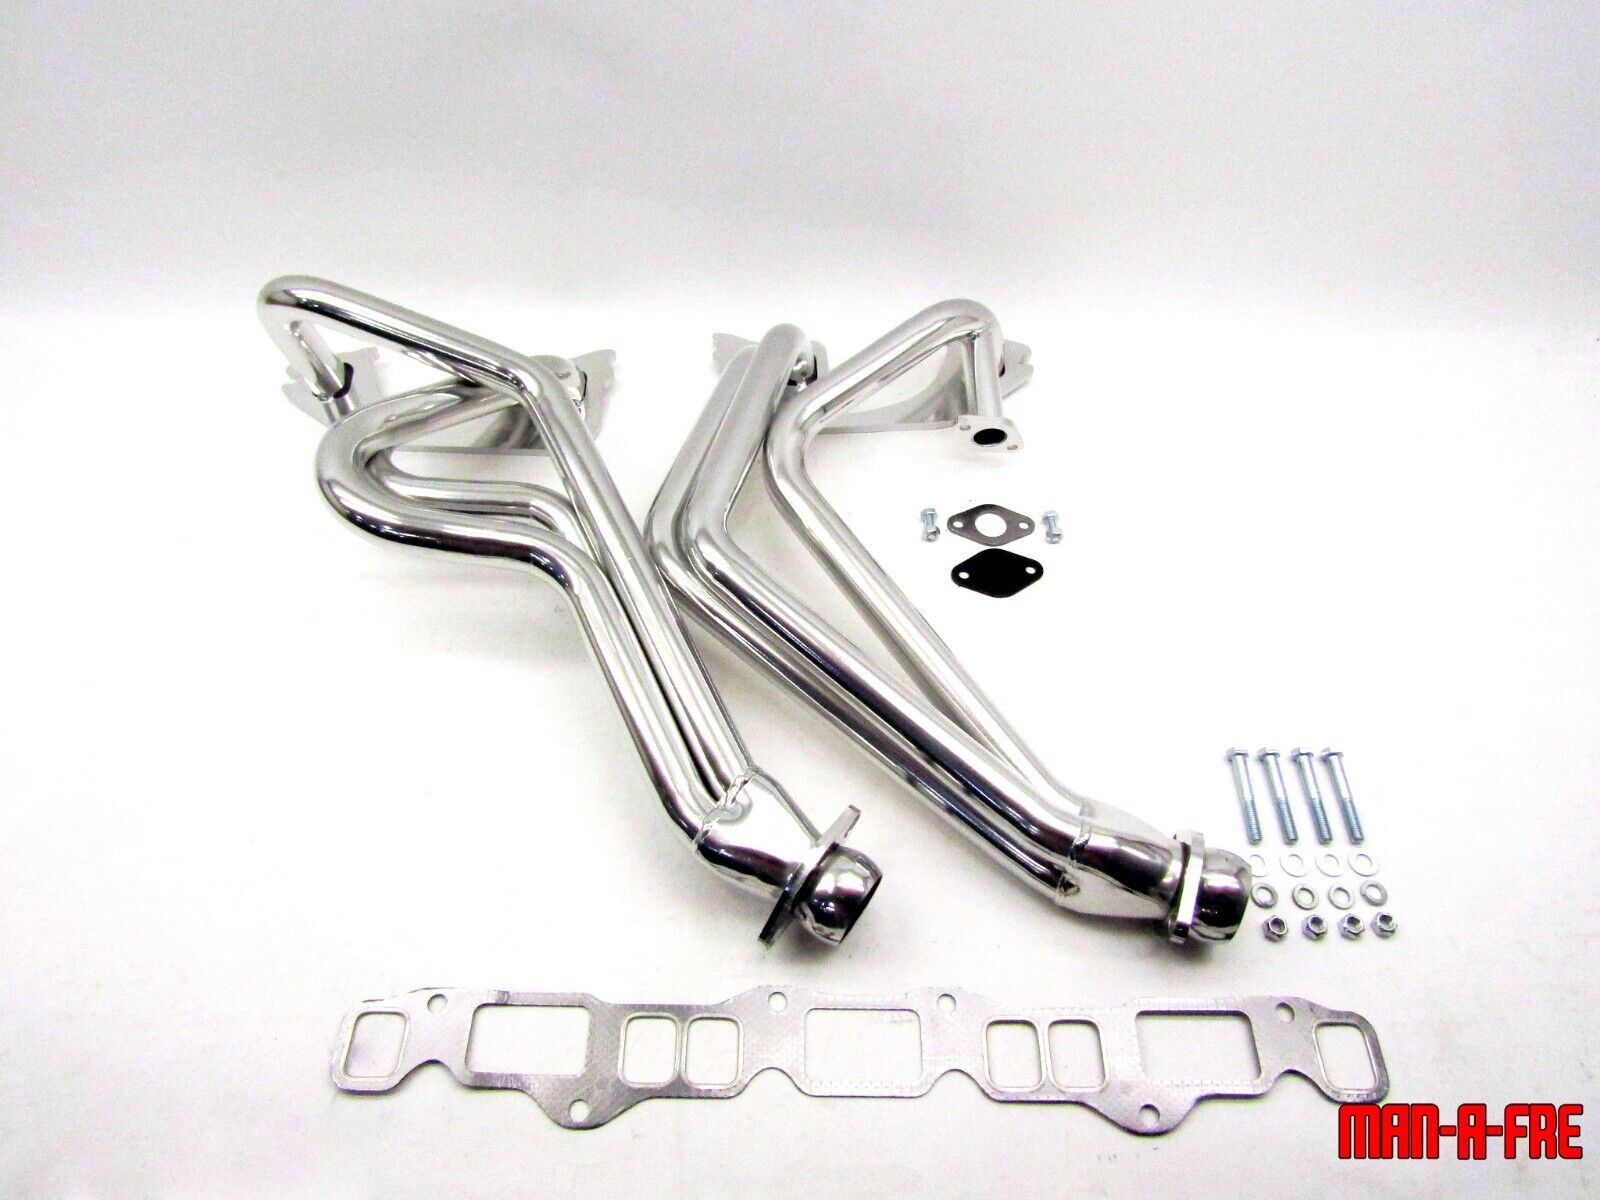 Man-A-Fre Ceramic Coated Exhaust Headers for 1968-1987 Toyota Land Cruisers